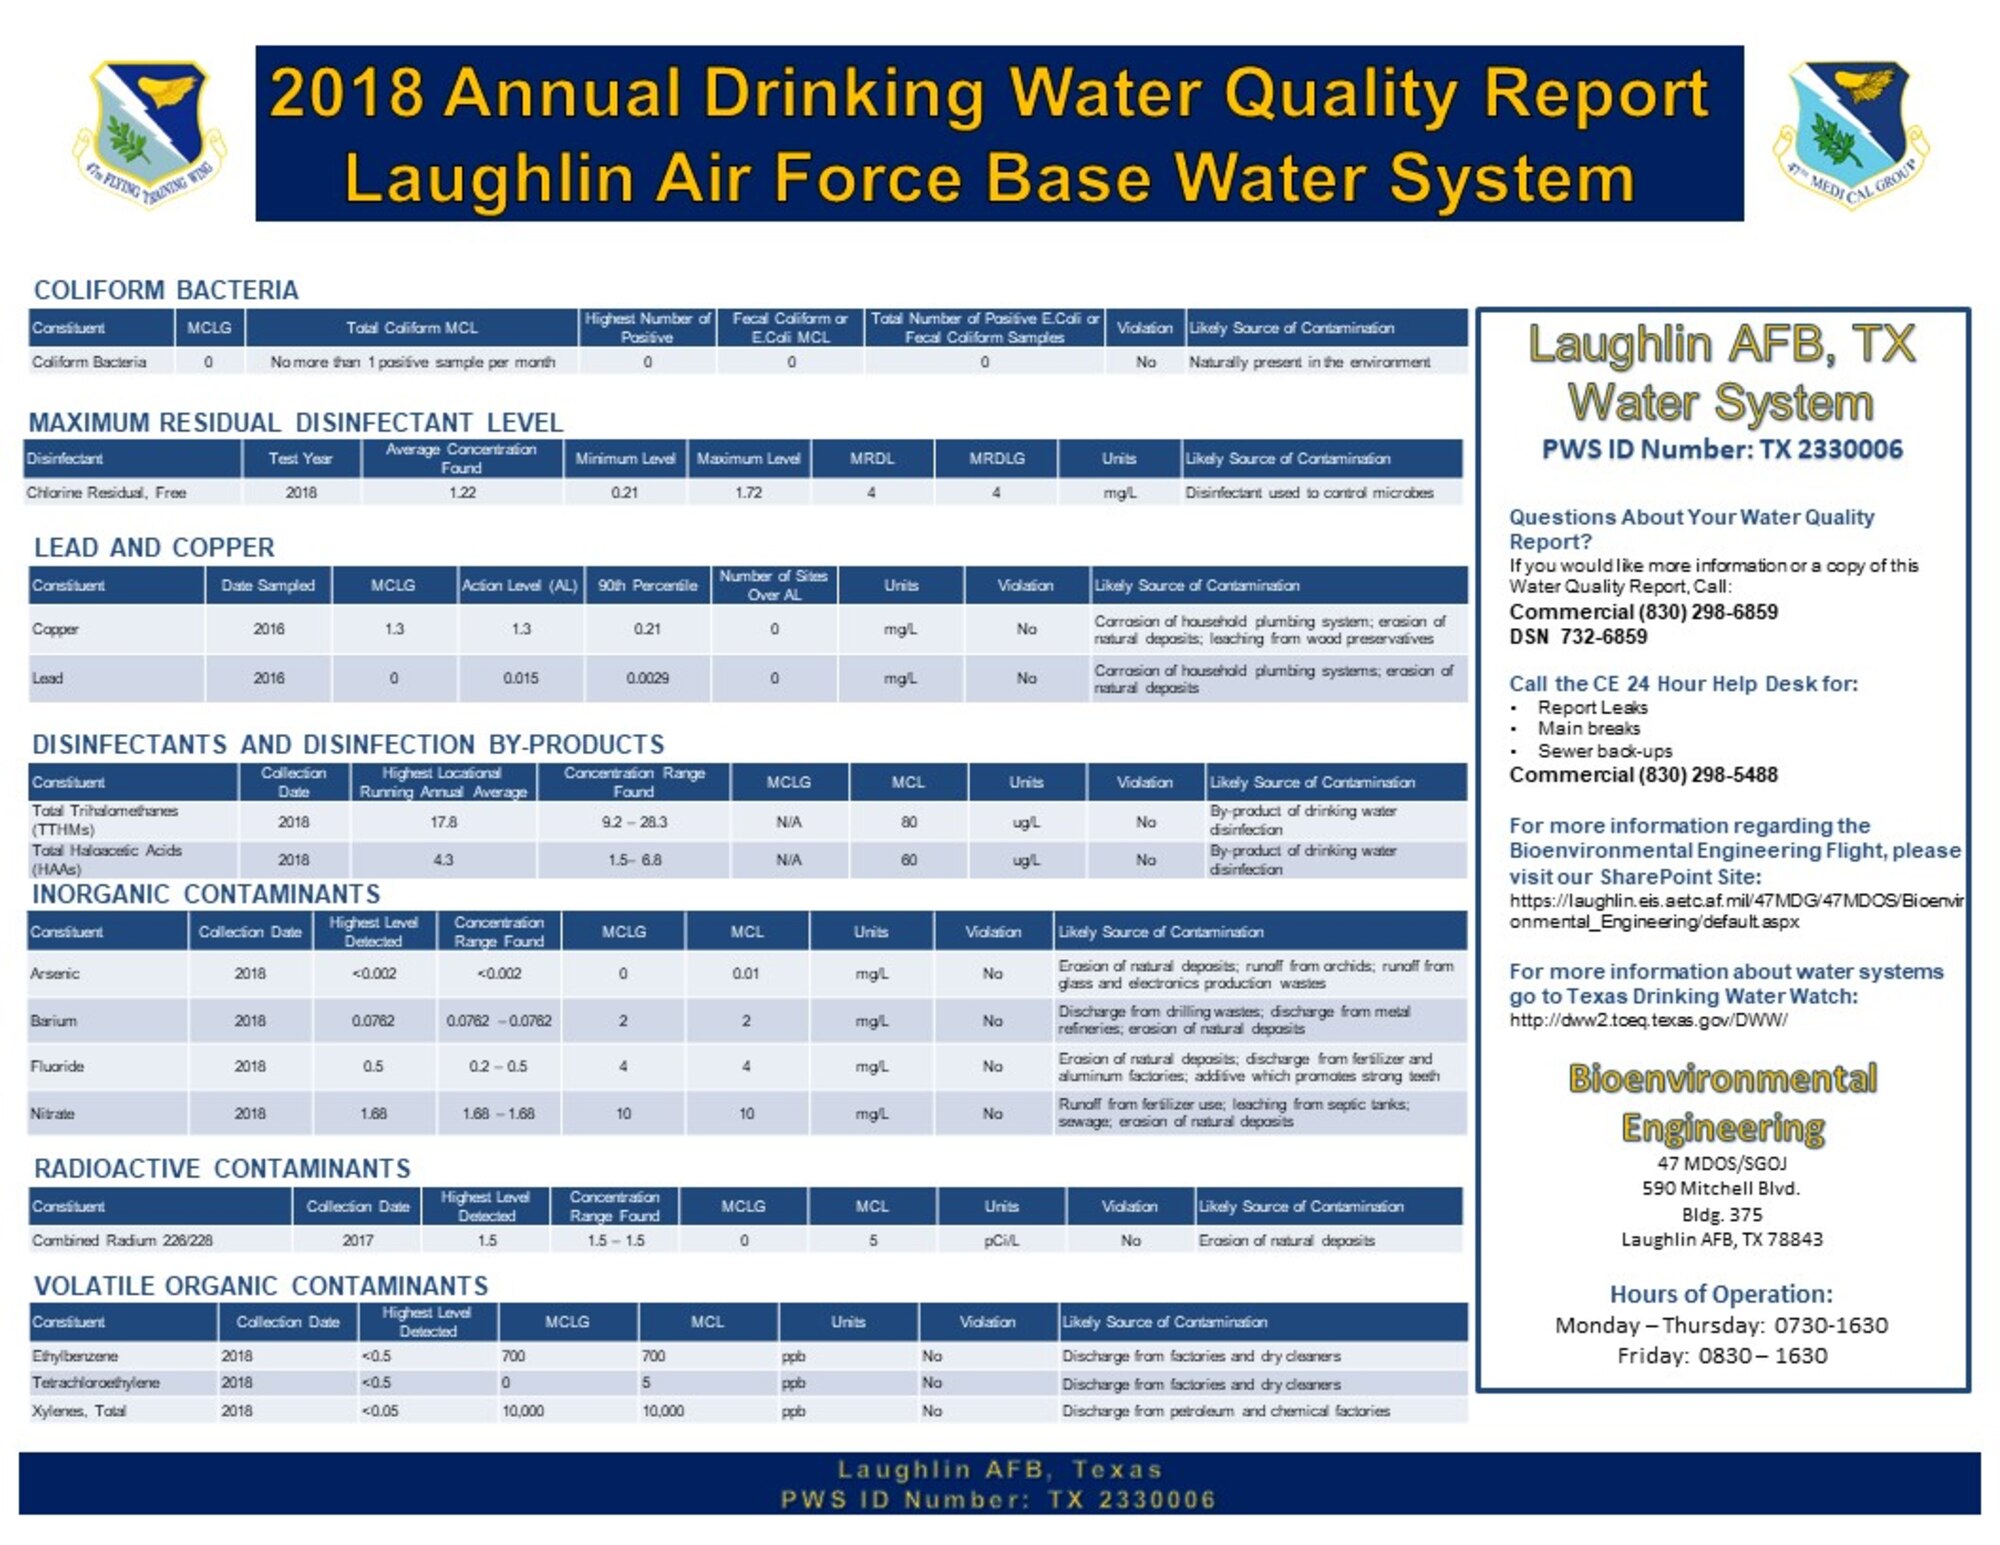 Every year Laughlin AFB is mandated by the State of Texas and the Environmental Protection Agency to publish the annual water sampling results for Laughlin AFB’s and Laughlin AFB Recreation Area’s drinking water.  These reports are designed to inform the consumer what is in their drinking water at Laughlin AFB and Laughlin AFB Recreation Area.  The two reports can be found on Laughlin AFB’s public website at http://www.laughlin.af.mil/.  In summary, the drinking water at Laughlin AFB and Laughlin AFB Recreation Area meet all drinking water requirements set forth by the EPA's Safe Drinking Water Act.